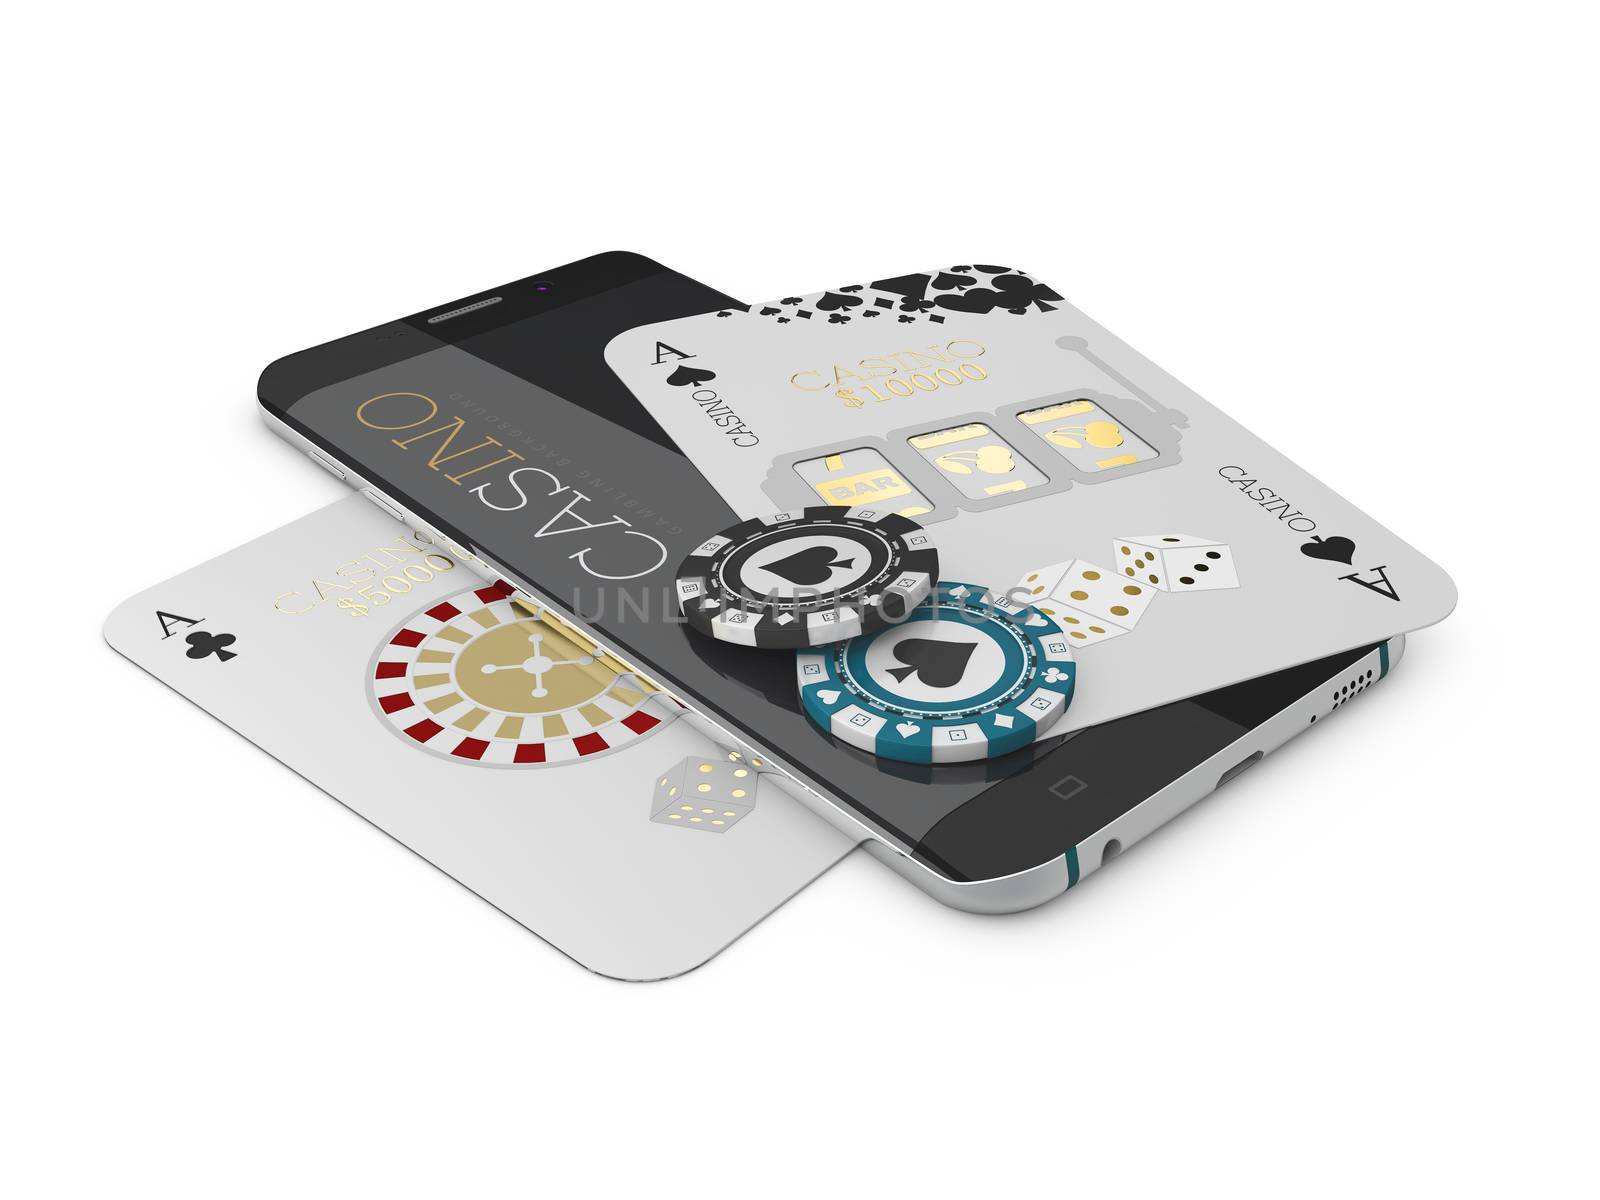 Online Internet casino app, poker card and chip on the phone, gambling casino games. 3d illustration by tussik